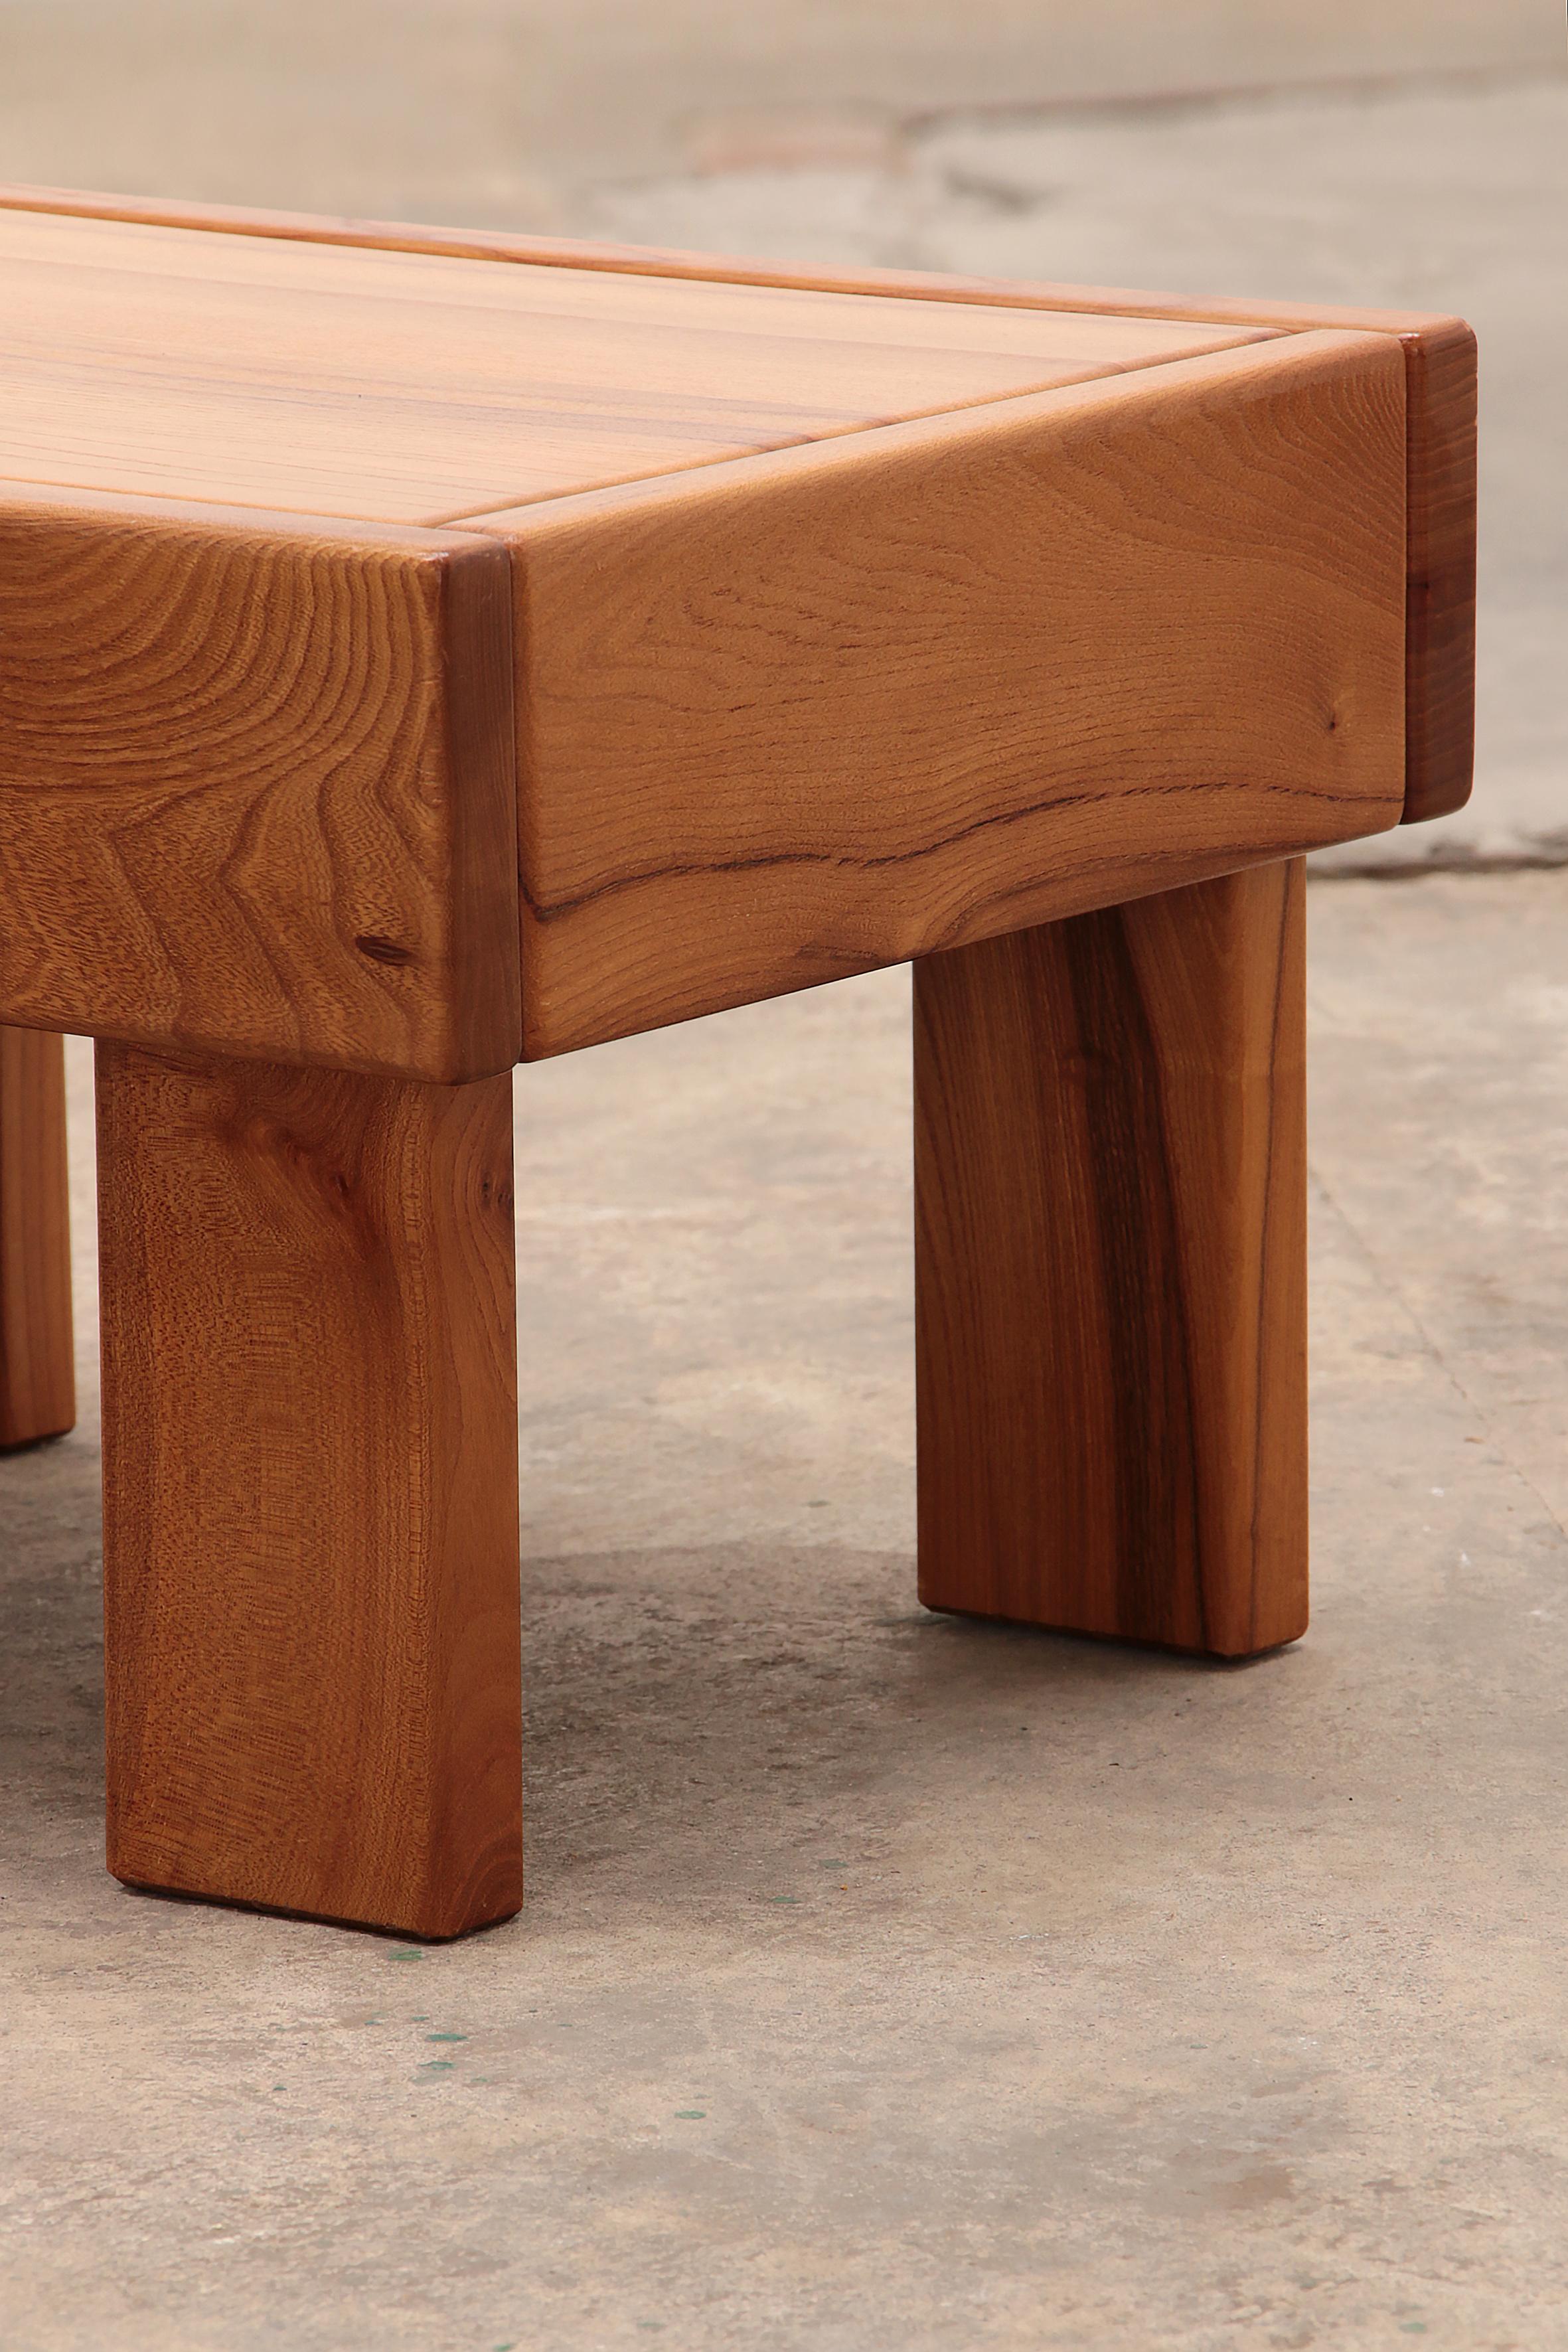 Maison Regain Set of Elm Wood Tables from the 1970s, France 3